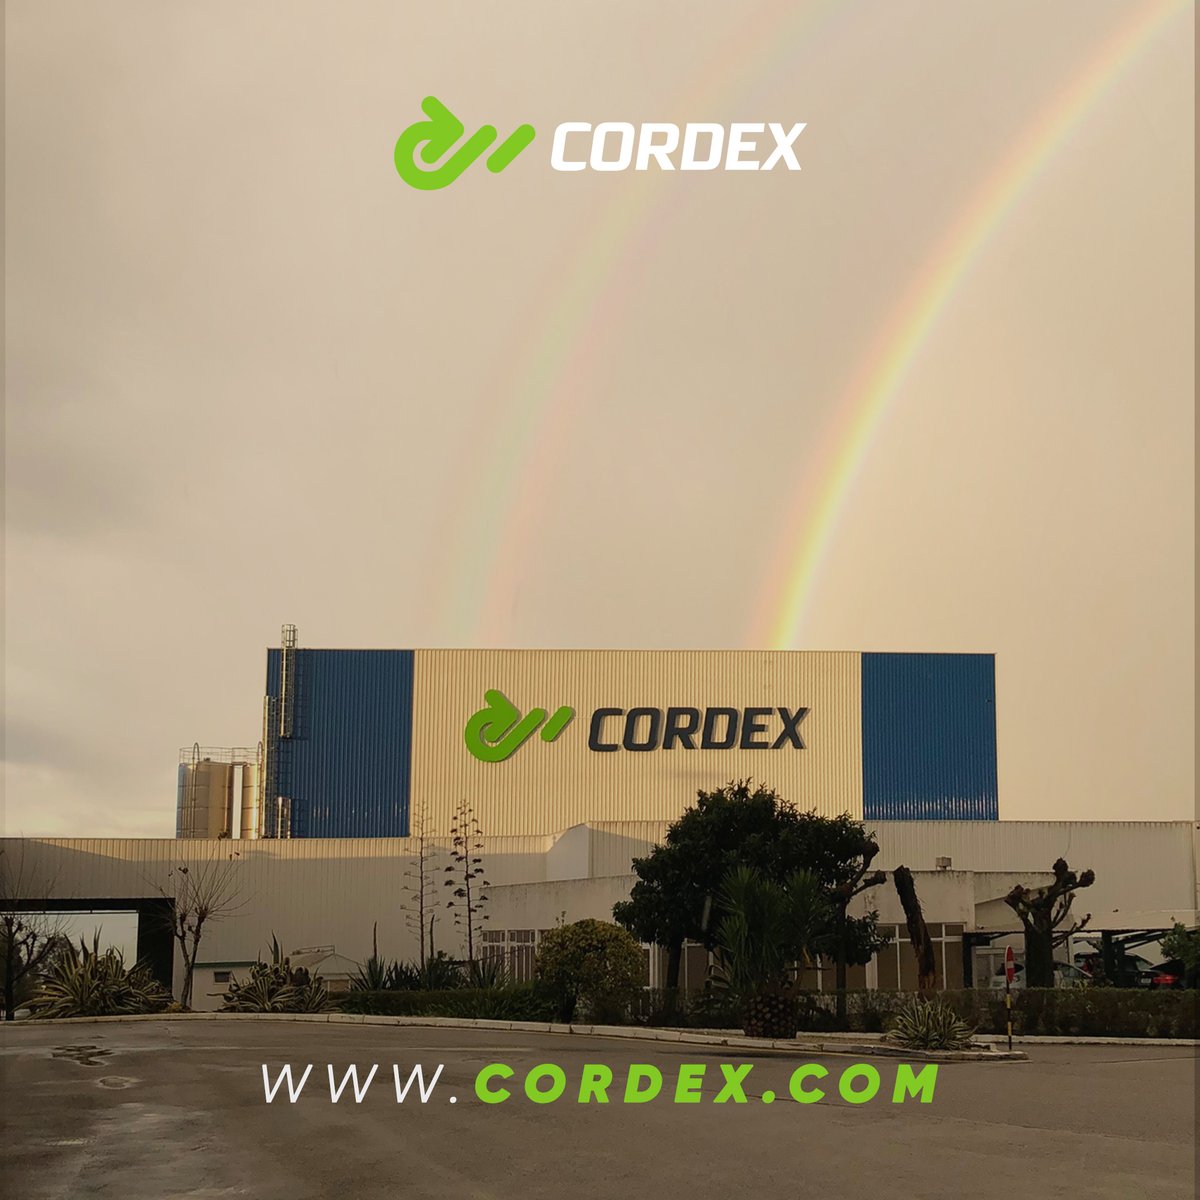 The beginning of a new year fills us with energy to face new challenges and opportunities. Shall we make 2023 a year of achievements? 🙌 🌈
#Cordex #CordexAgri #CordexAqua #CordexPro #BaleWithUltimateStrength #One4All
#industria #novoano #oportunidades #industry #newyear